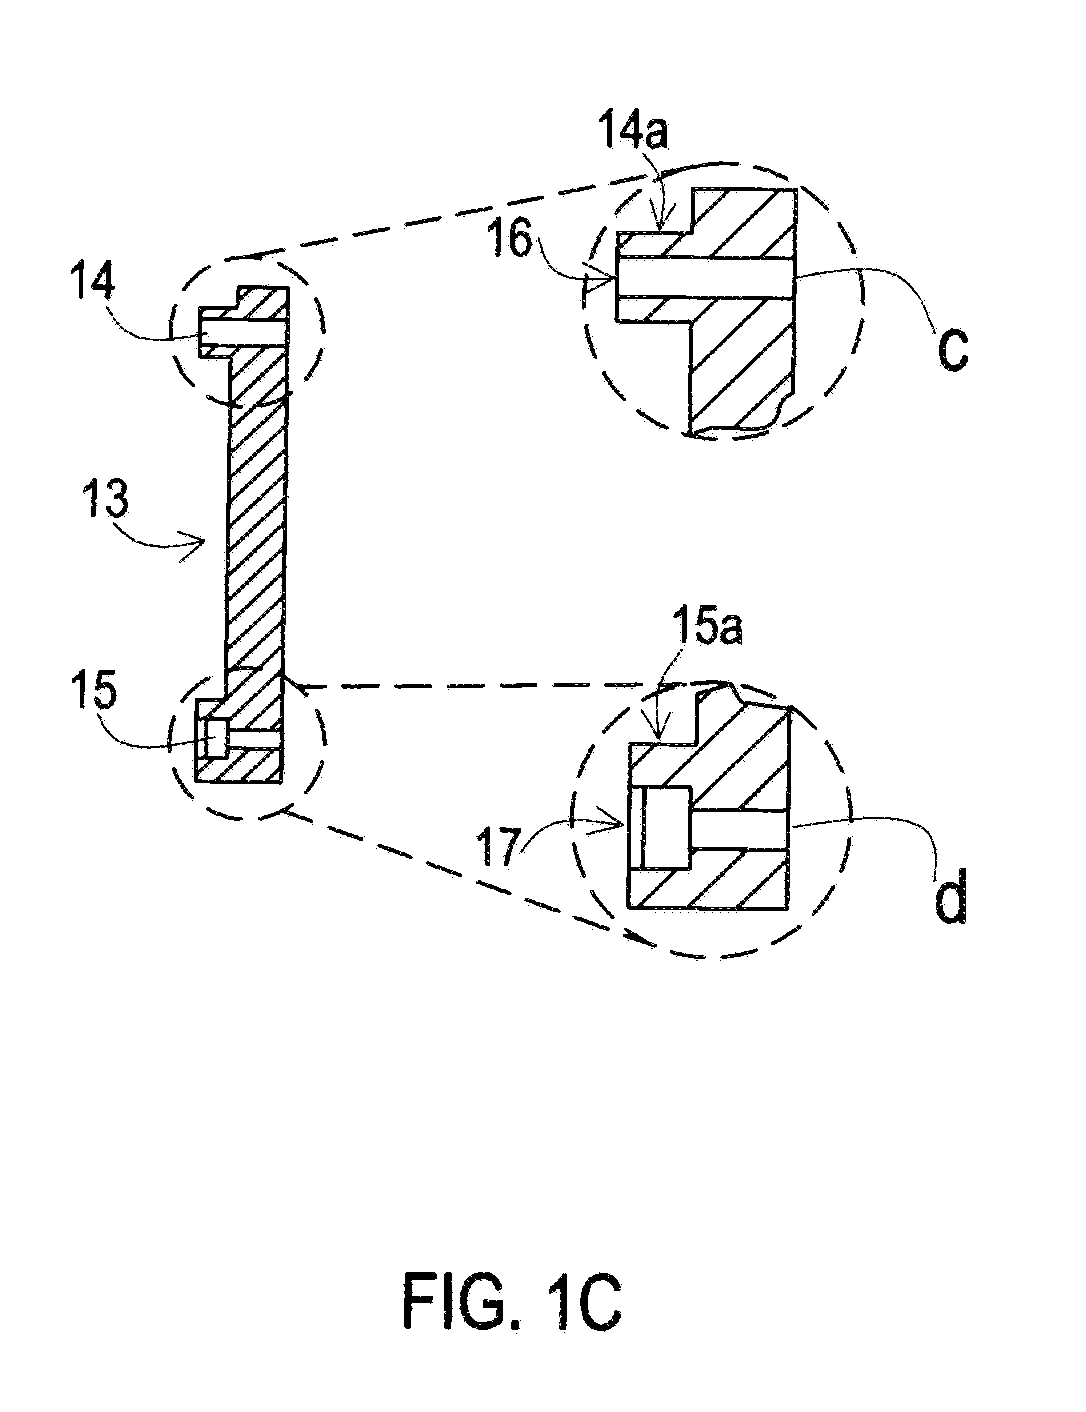 Interconnecting Microfluidic Package, Fabrication Method and Methods of Use